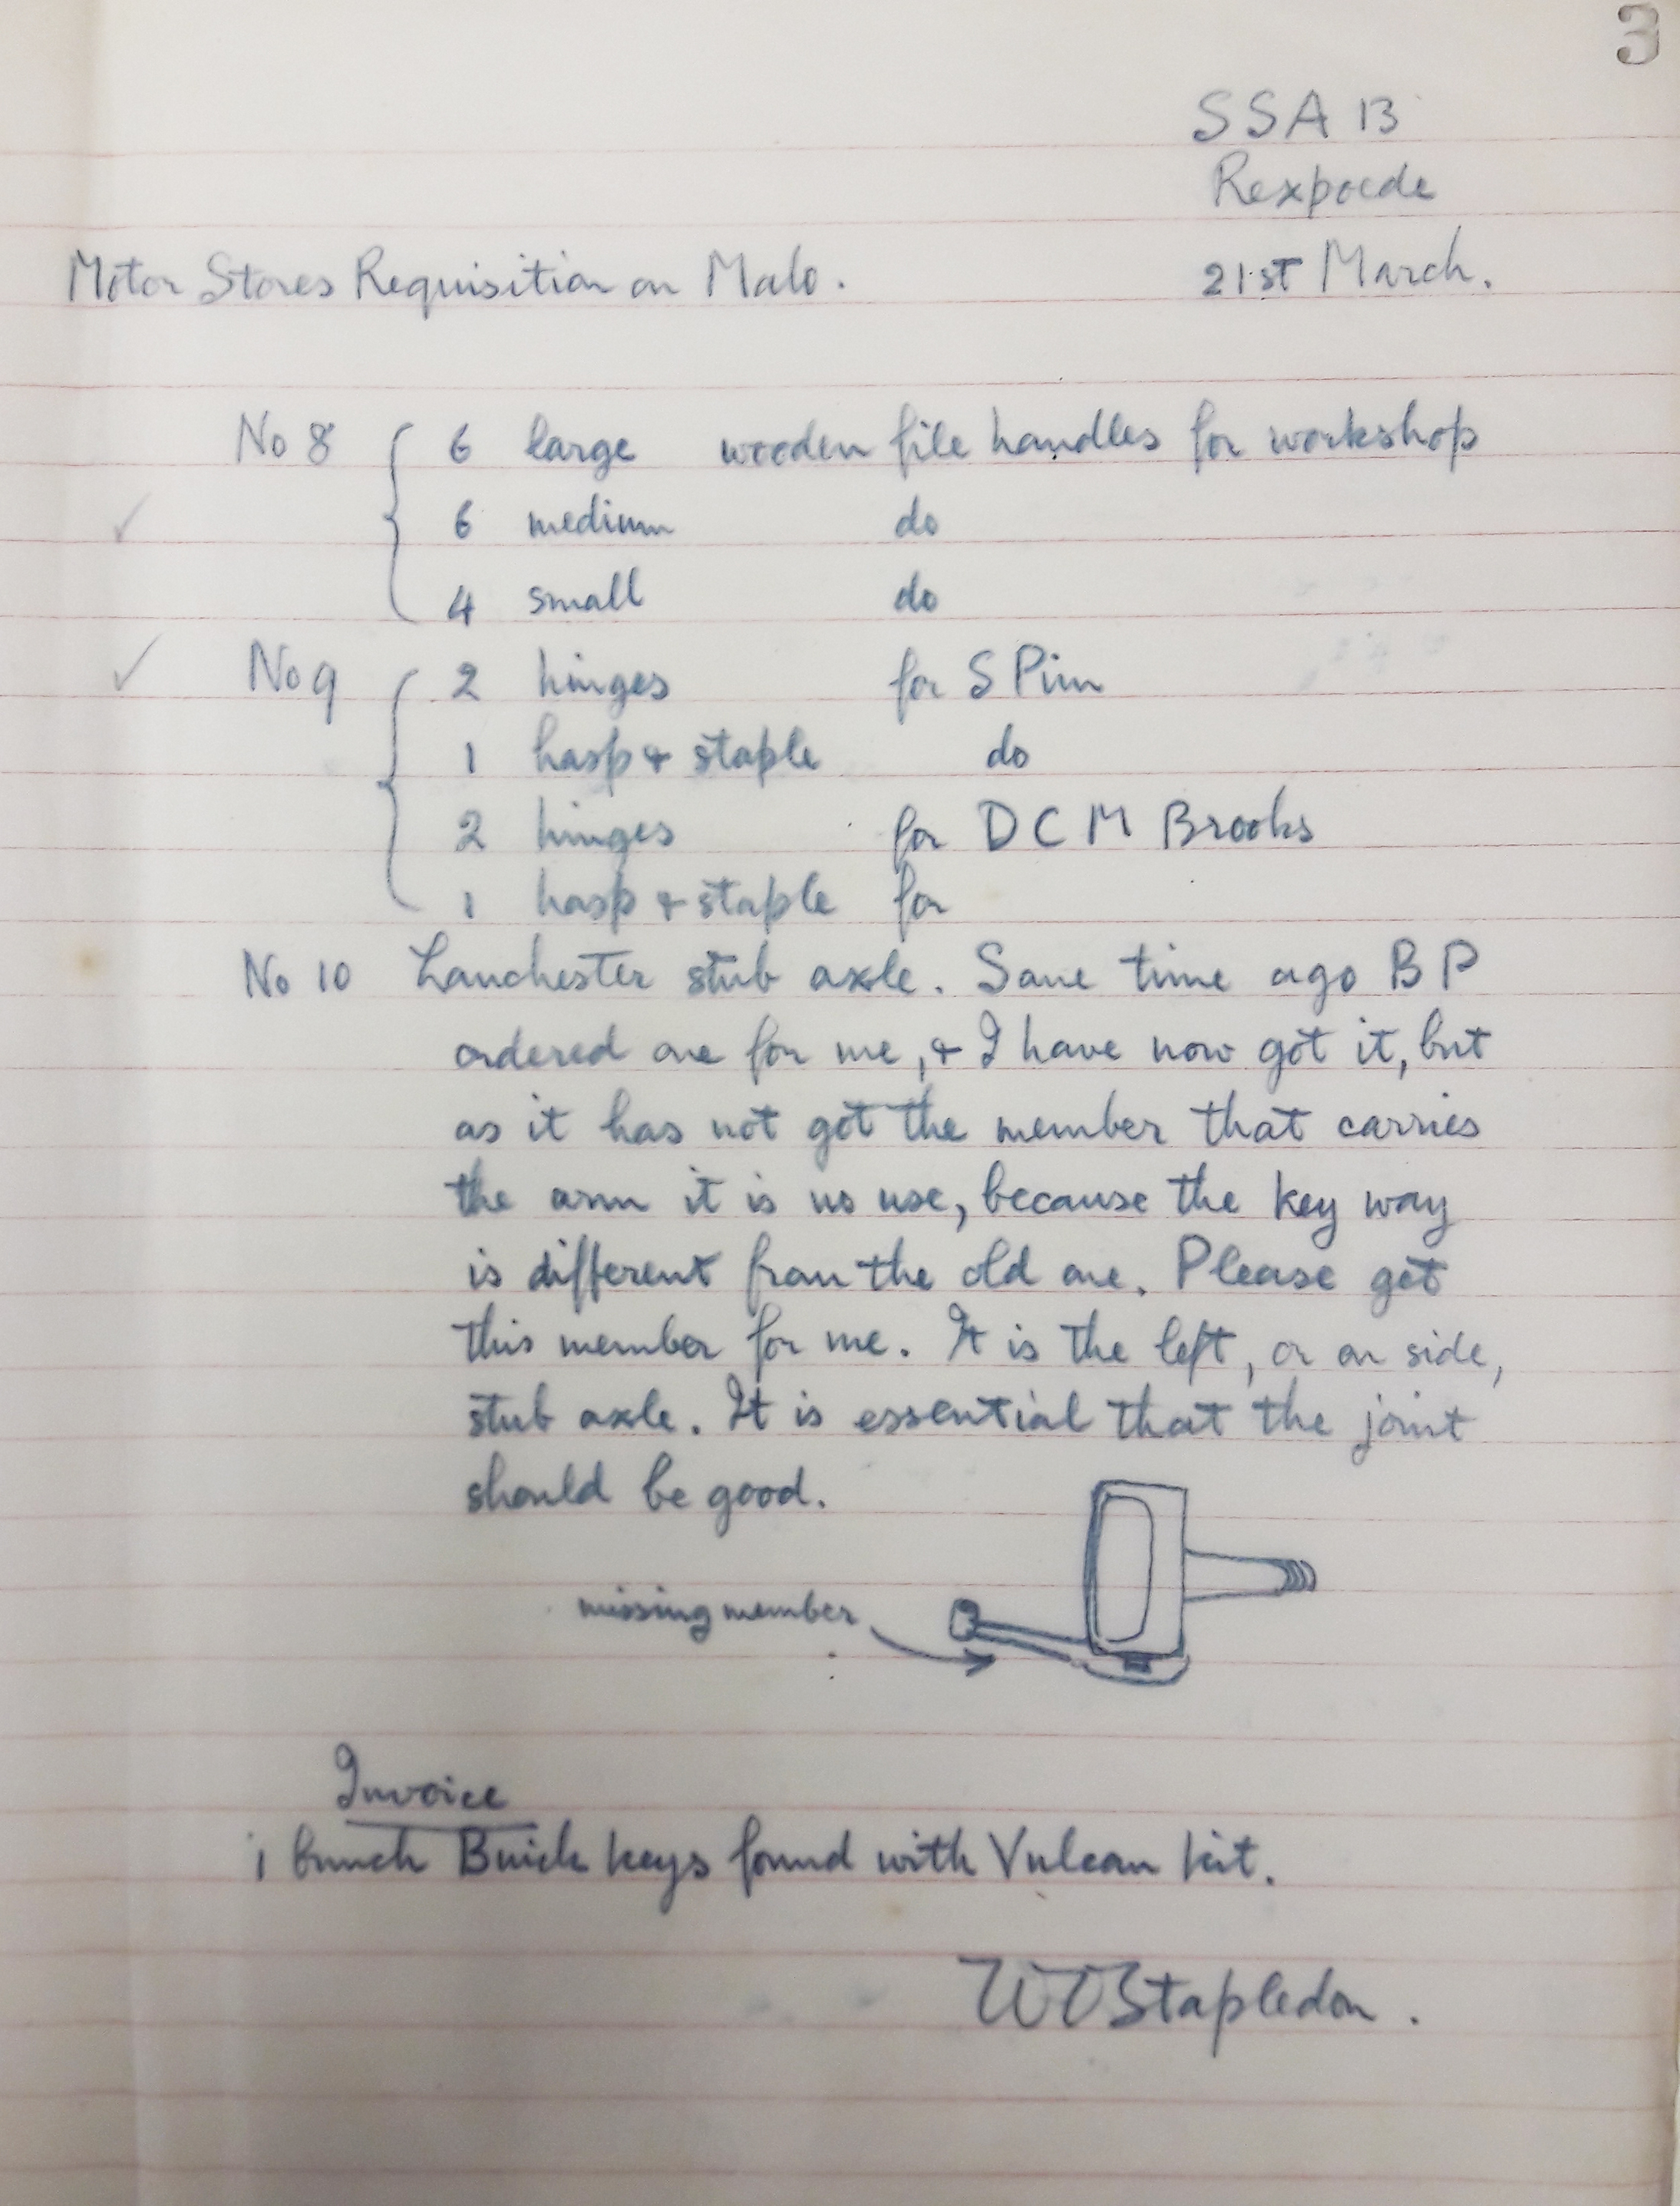 Requisitions book, Motor Store Records (TEMP MSS 881)